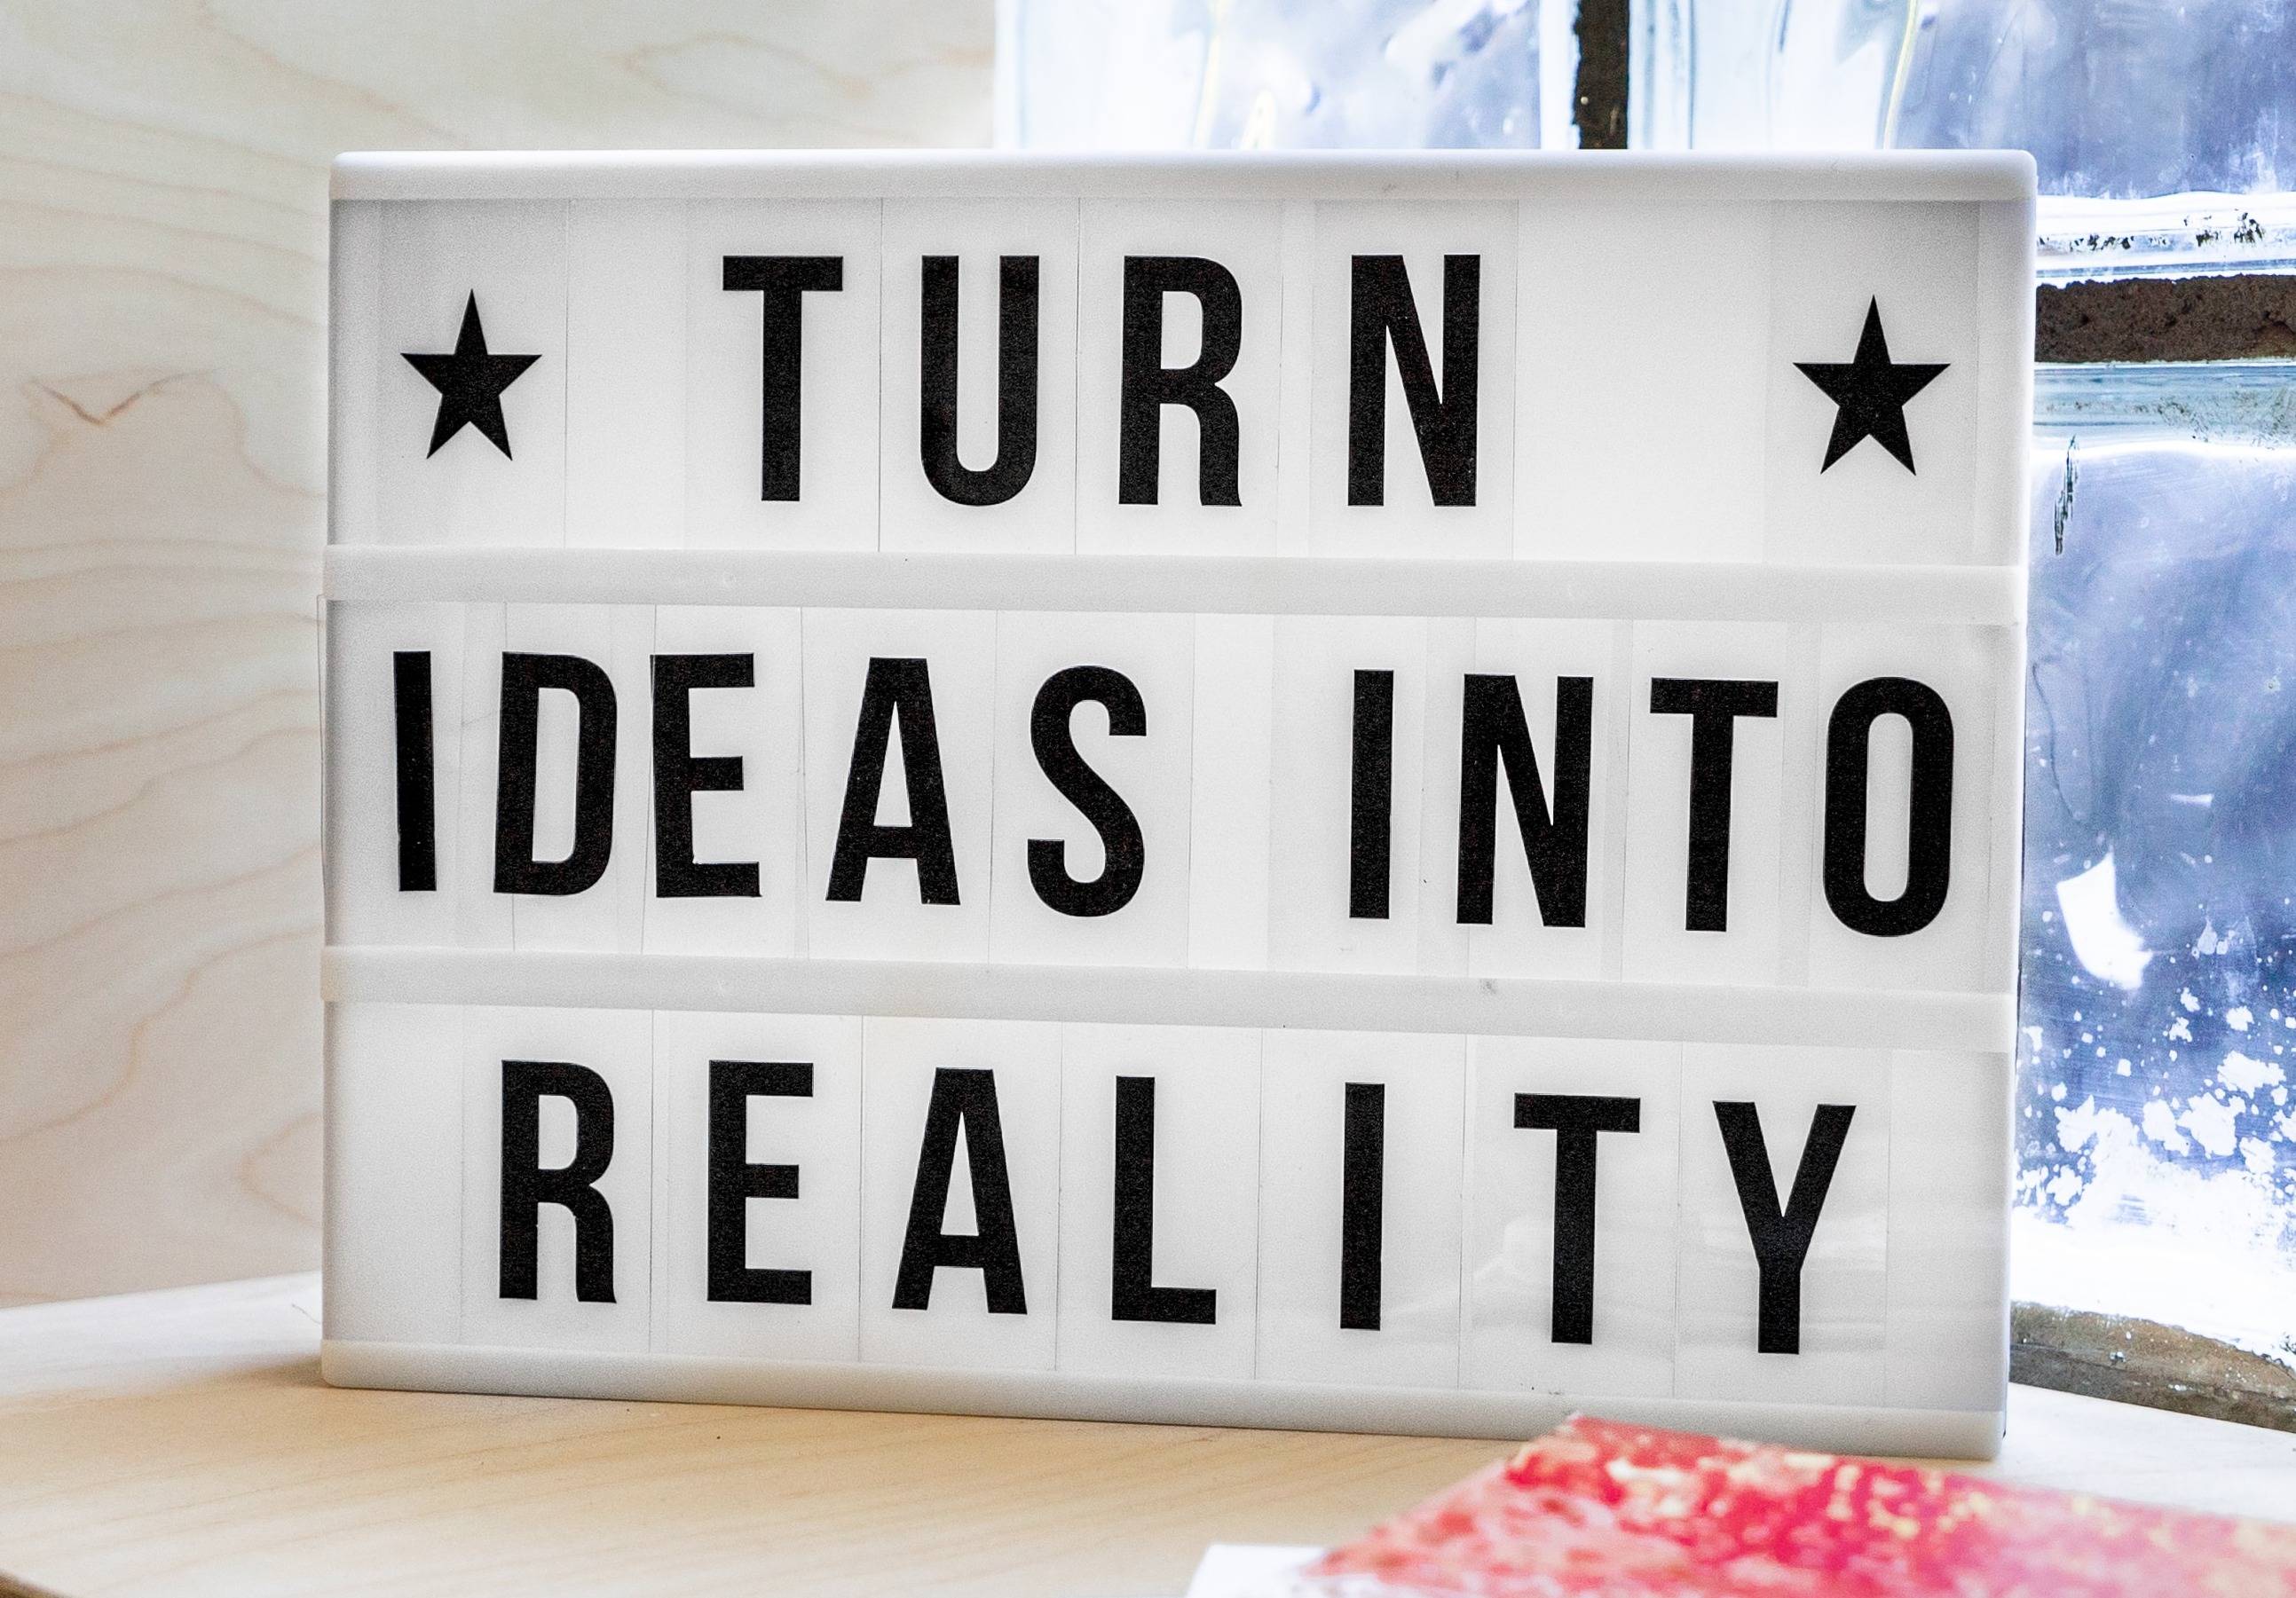 sign that says "turn ideas into reality"